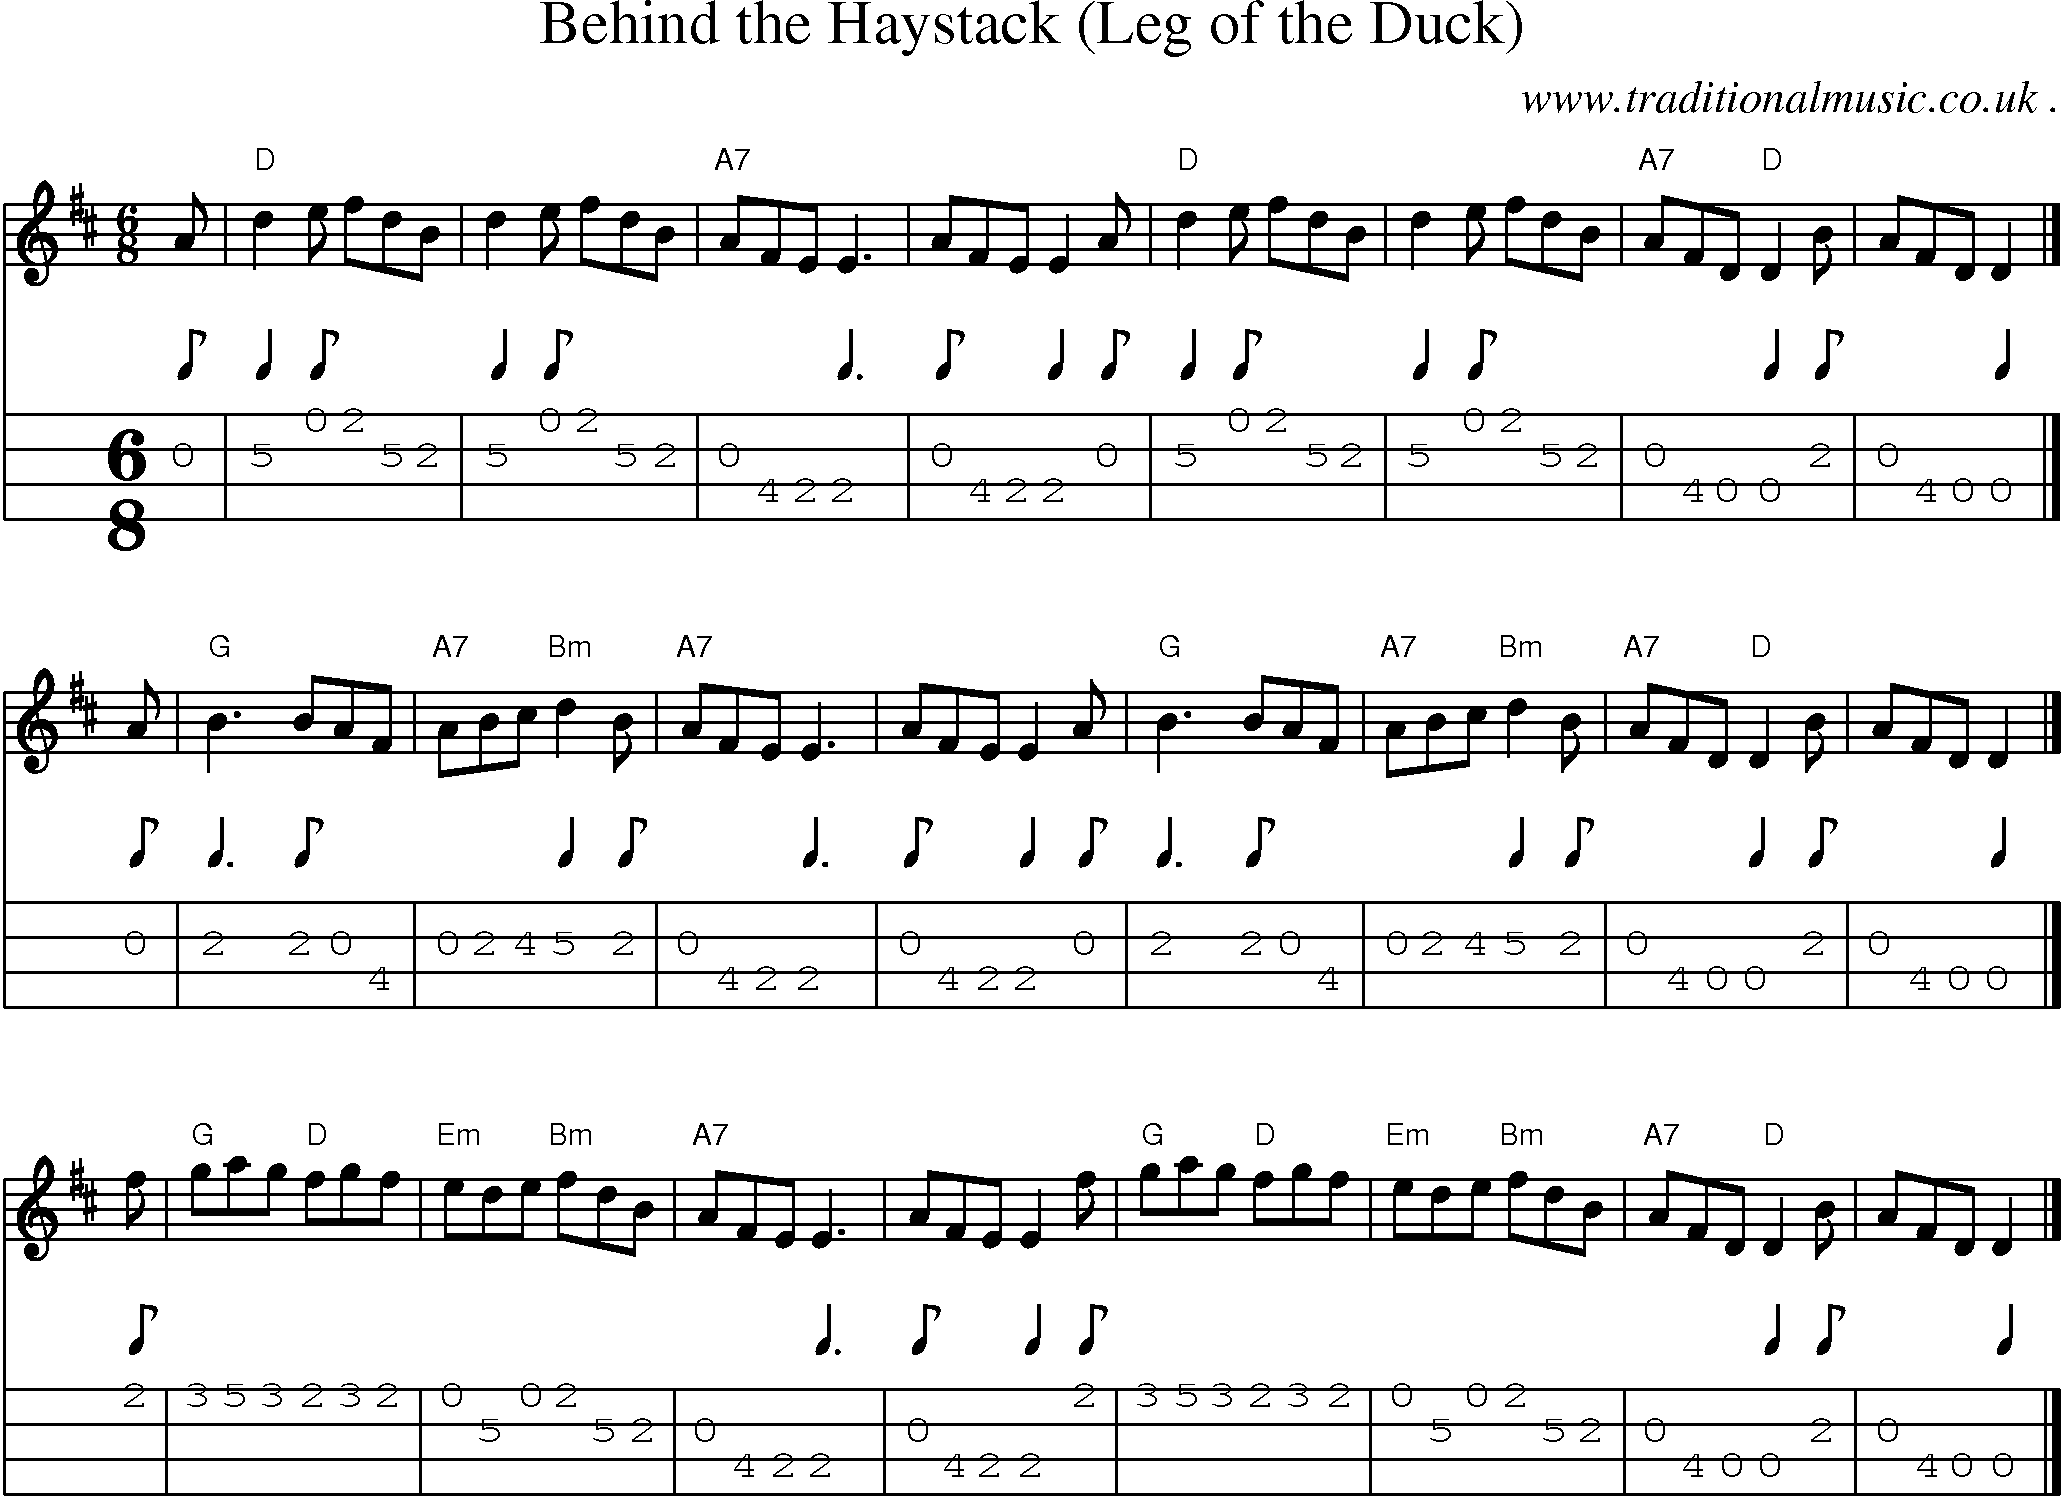 Sheet-music  score, Chords and Mandolin Tabs for Behind The Haystack Leg Of The Duck